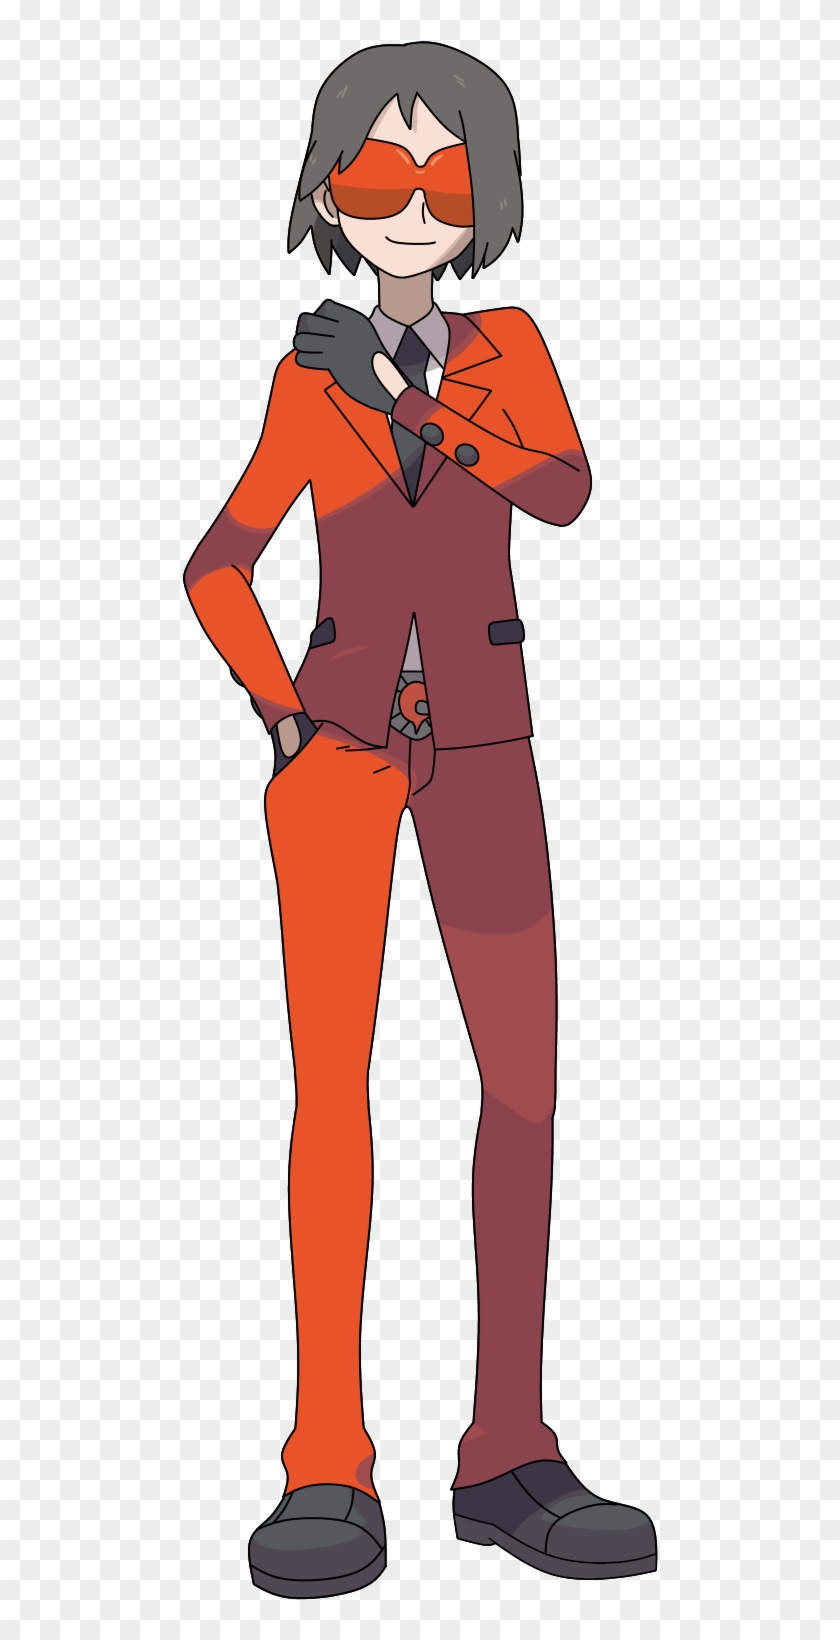 Calem Team Flare Outfit By Morki95 - Calem And Serena's Pokemon Teams #520842